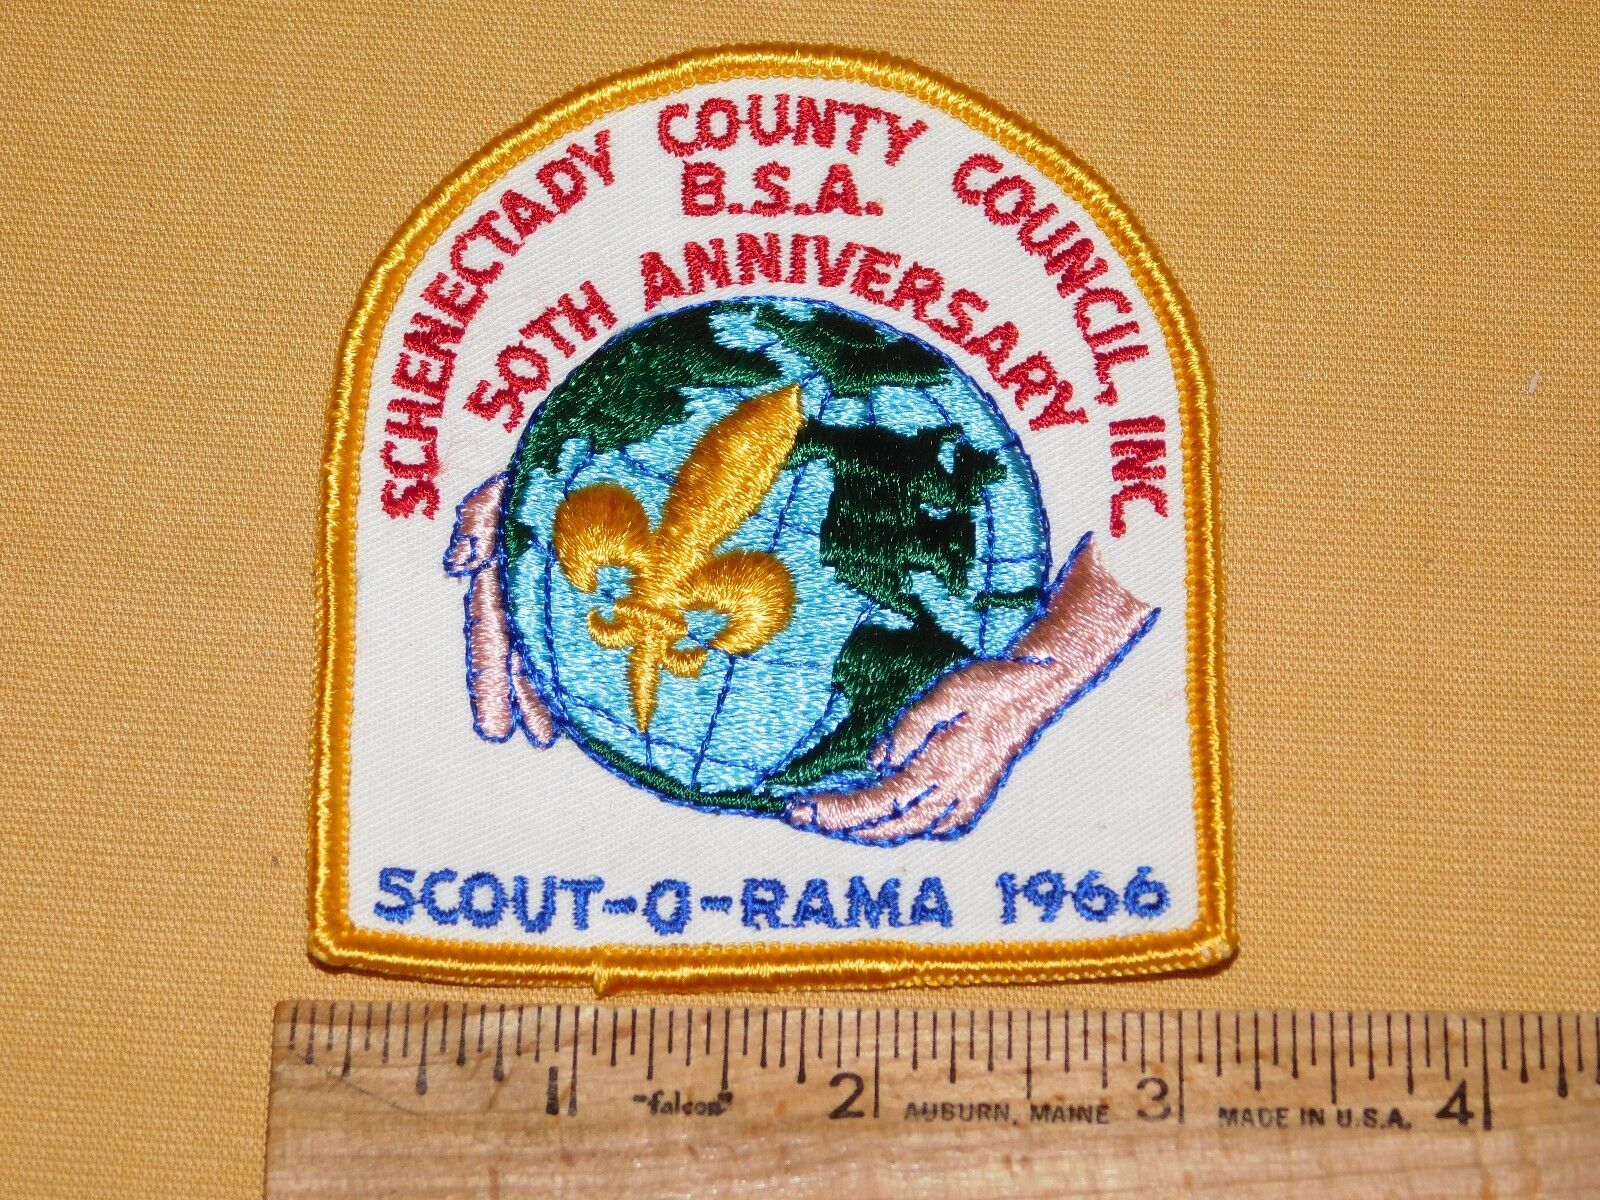 VINTAGE BSA BOY SCOUTS OF AMERICA PATCH 1966 SCHENECTADY 50TH ANNIV SCOUT-O-RAMA